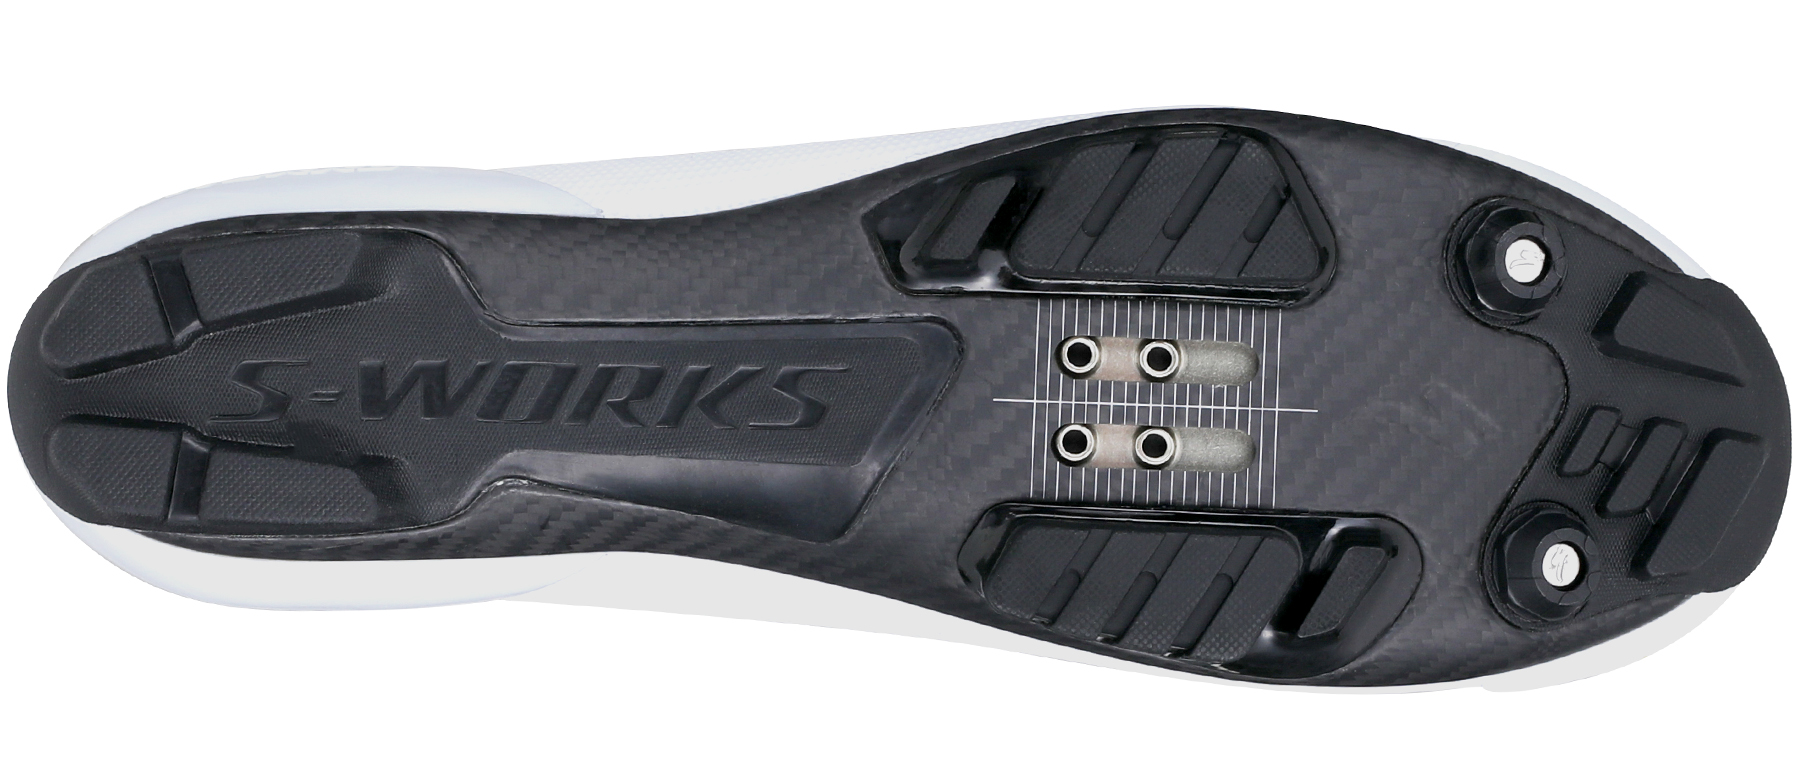 Specialized S-Works Recon Lace-up Gravel Shoe